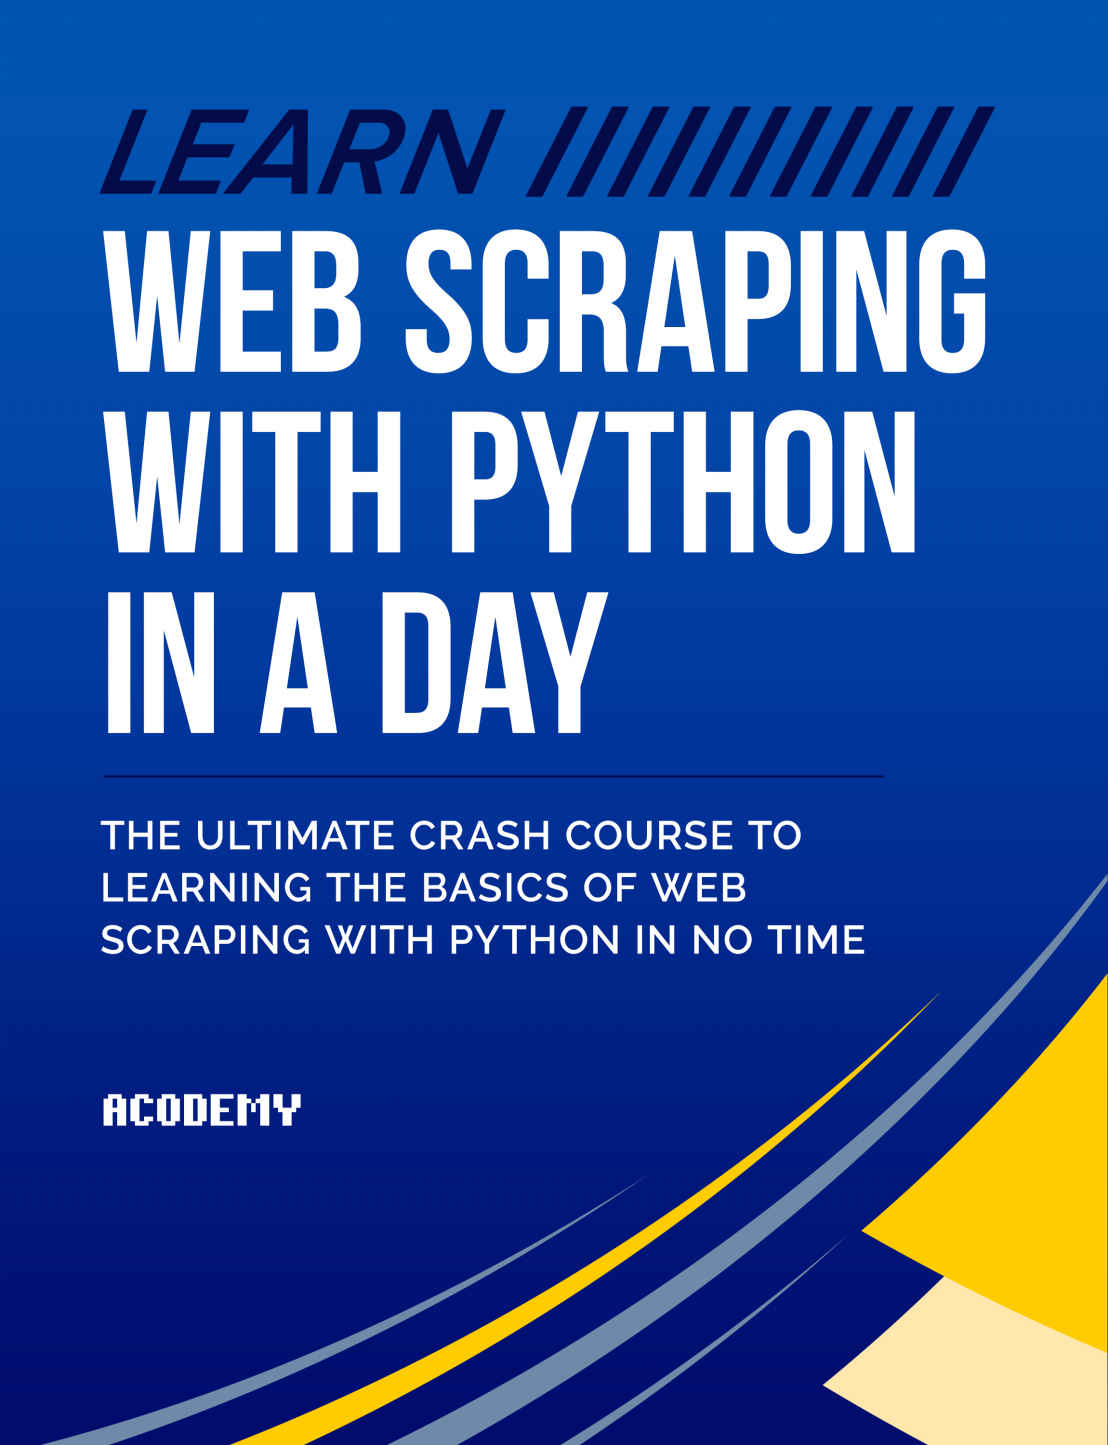 Python: Learn Web Scraping with Python In A DAY! - The Ultimate Crash Course to Learning the Basics of Web Scraping with Python In No Time (Web Scraping ... Python Books, Python for Beginners)